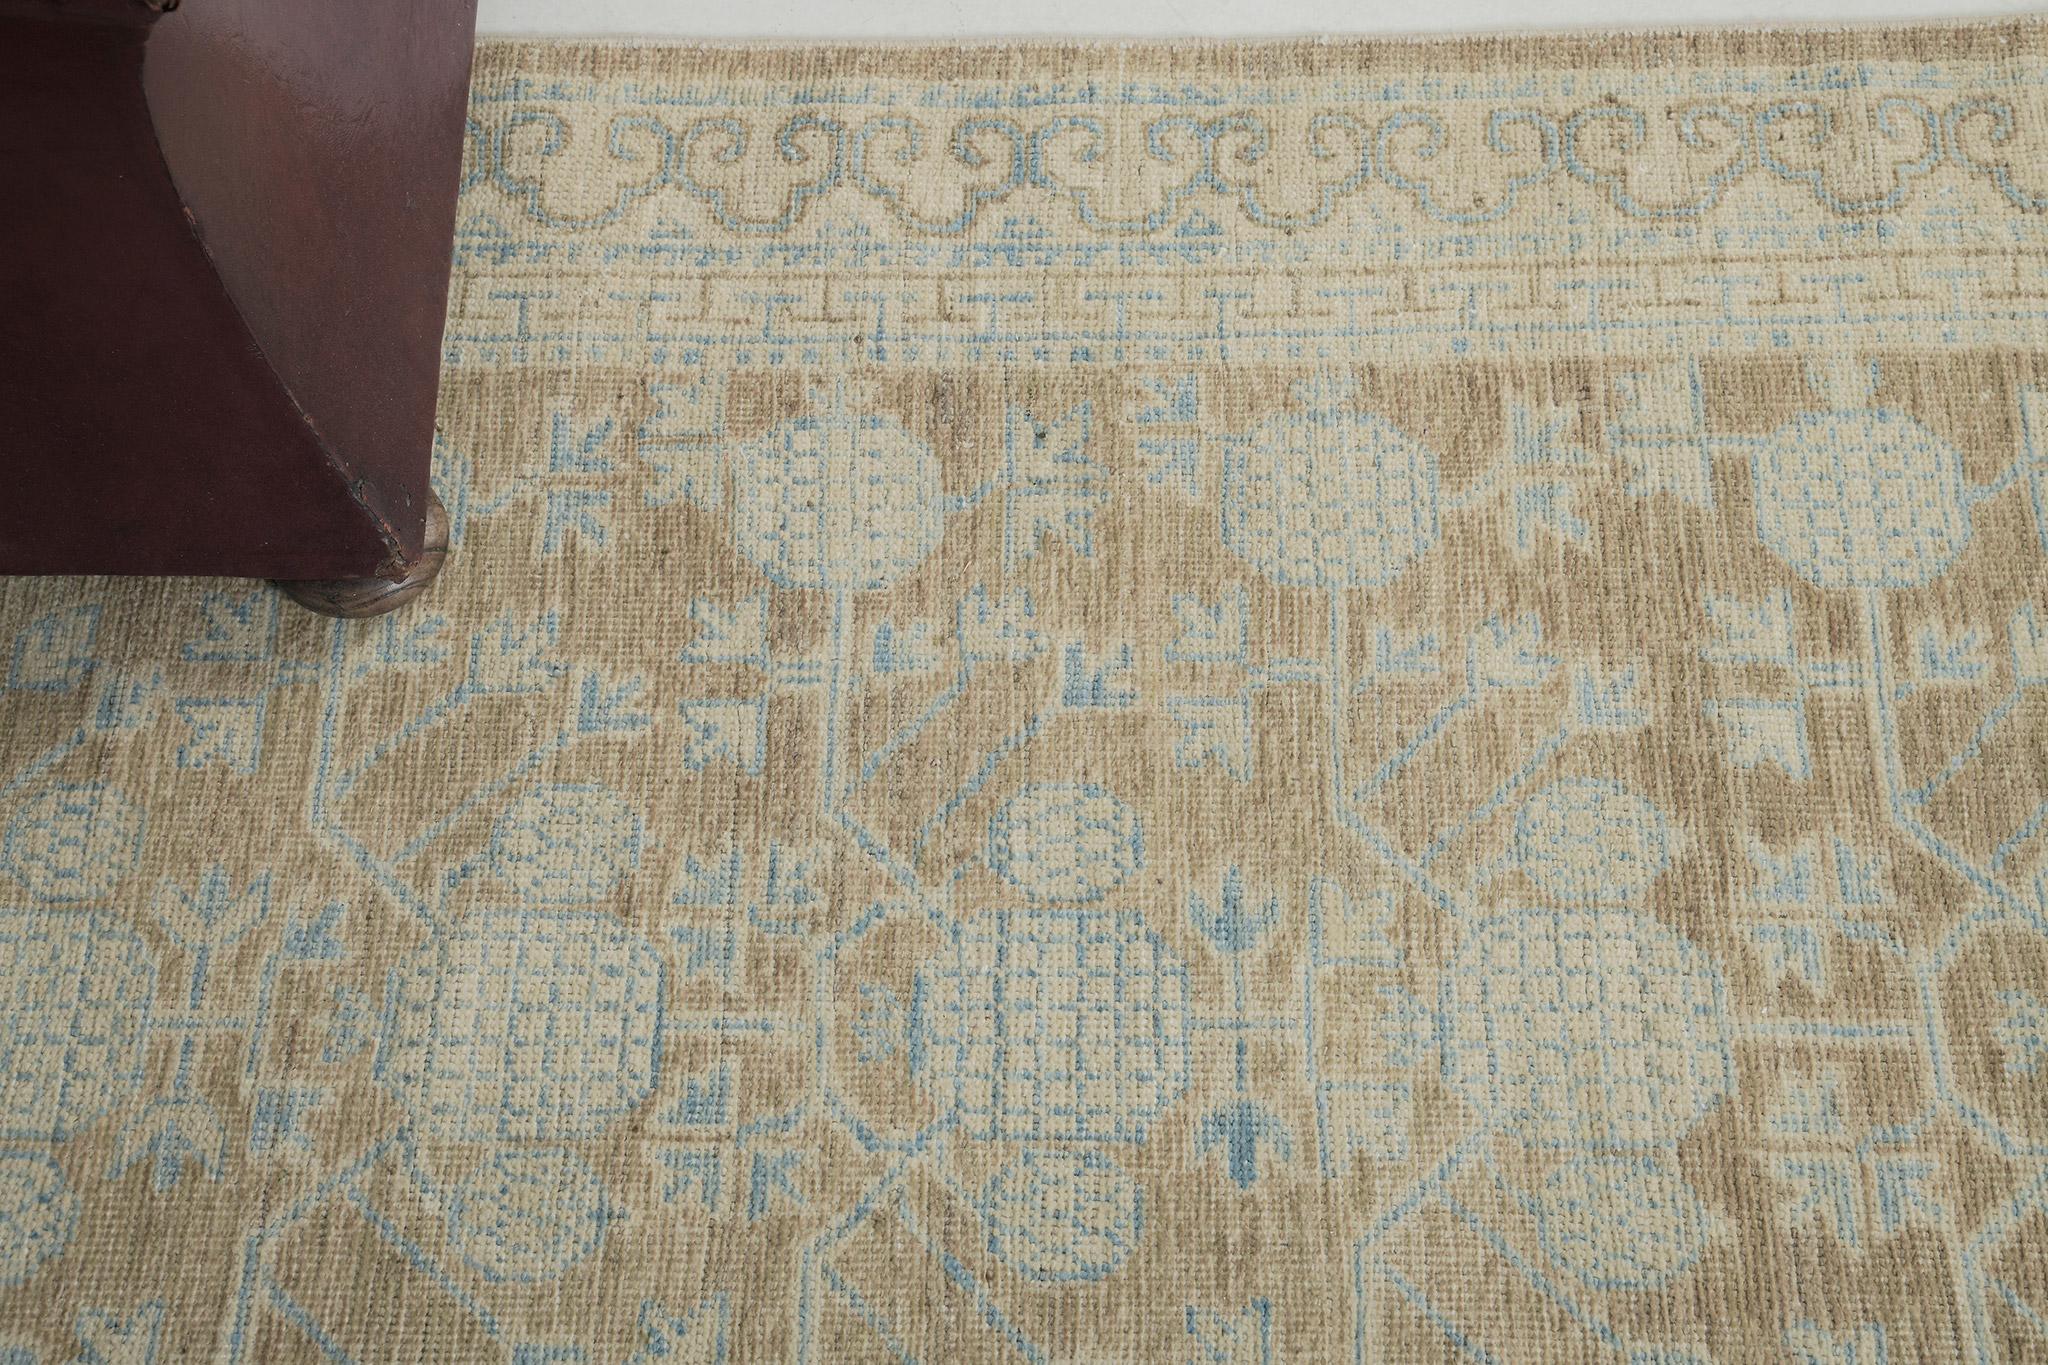 Patterned-positioned pomegranates and ornaments in outlined blue tones dominate the entire pattern of the runner. An excellent pile-woven wool vintage style Khotan design from our Muted Re-Creations collection that is remarkable in any space. Curled